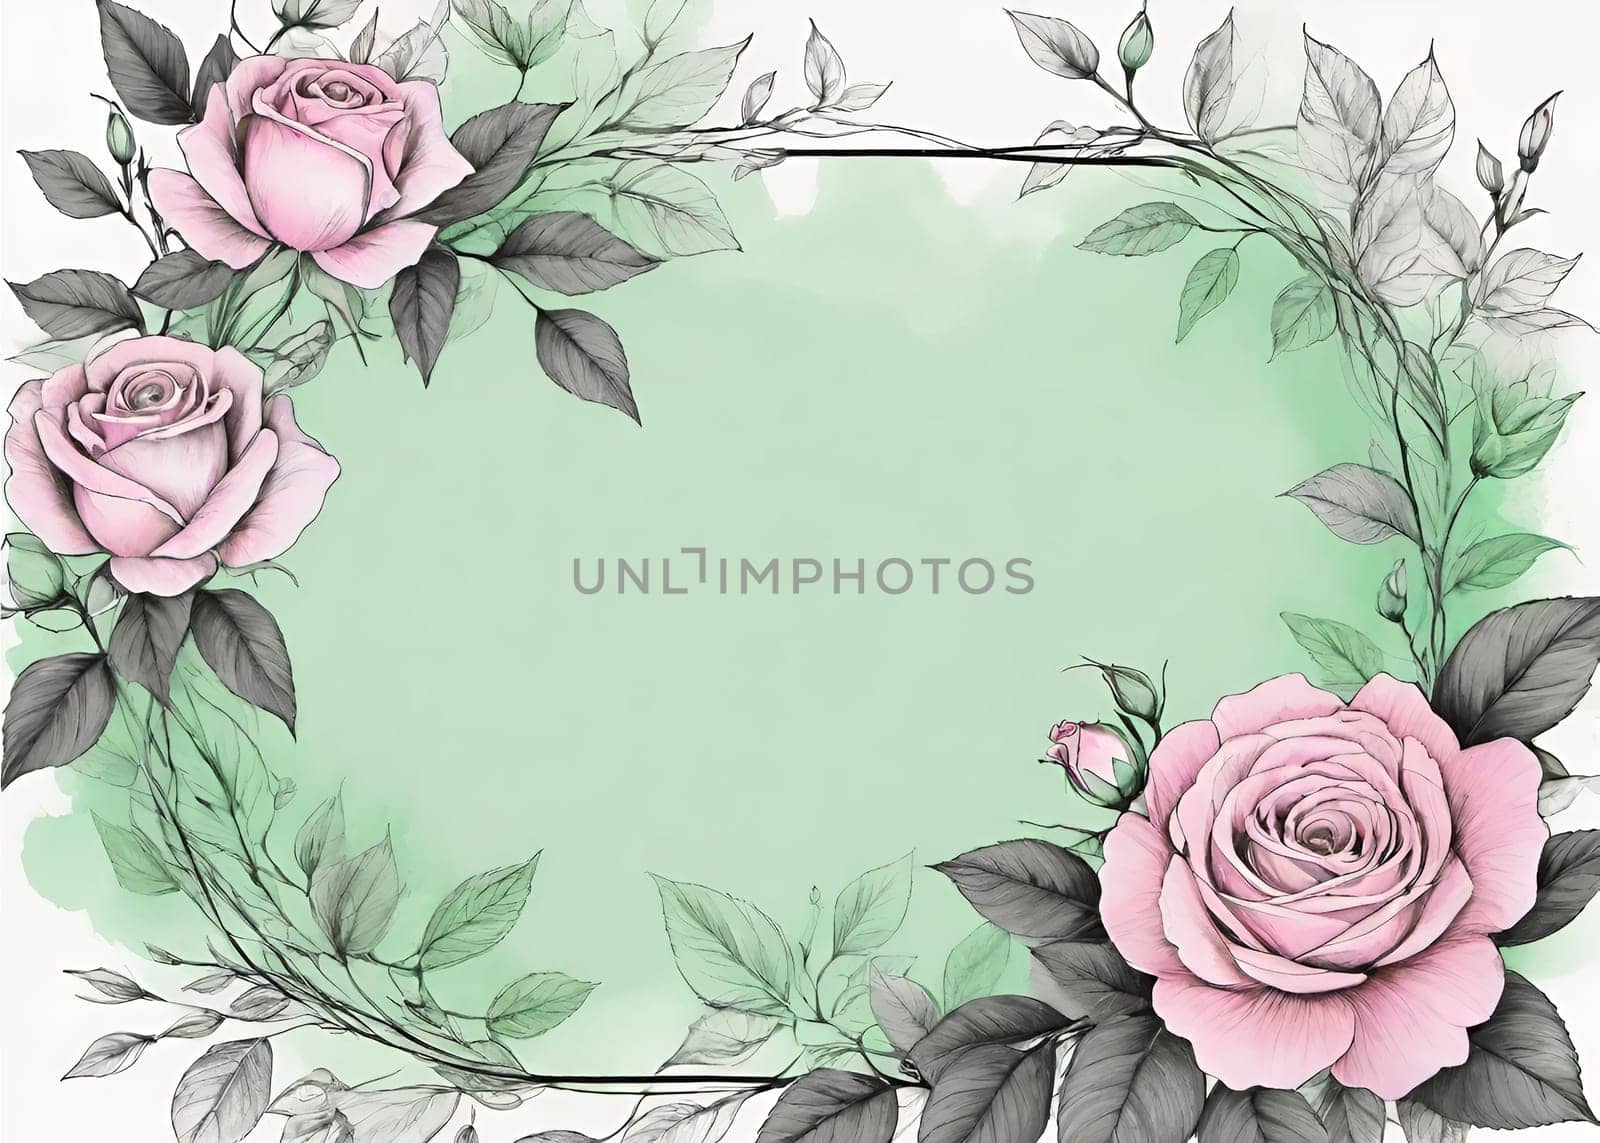 Wreath of pink roses and green leaves. Hand drawn vector illustration.Floral background with roses and leaves. Frame with pink roses and green leaves on white background. Vector illustration.Beautiful pink roses with green leaves on background.